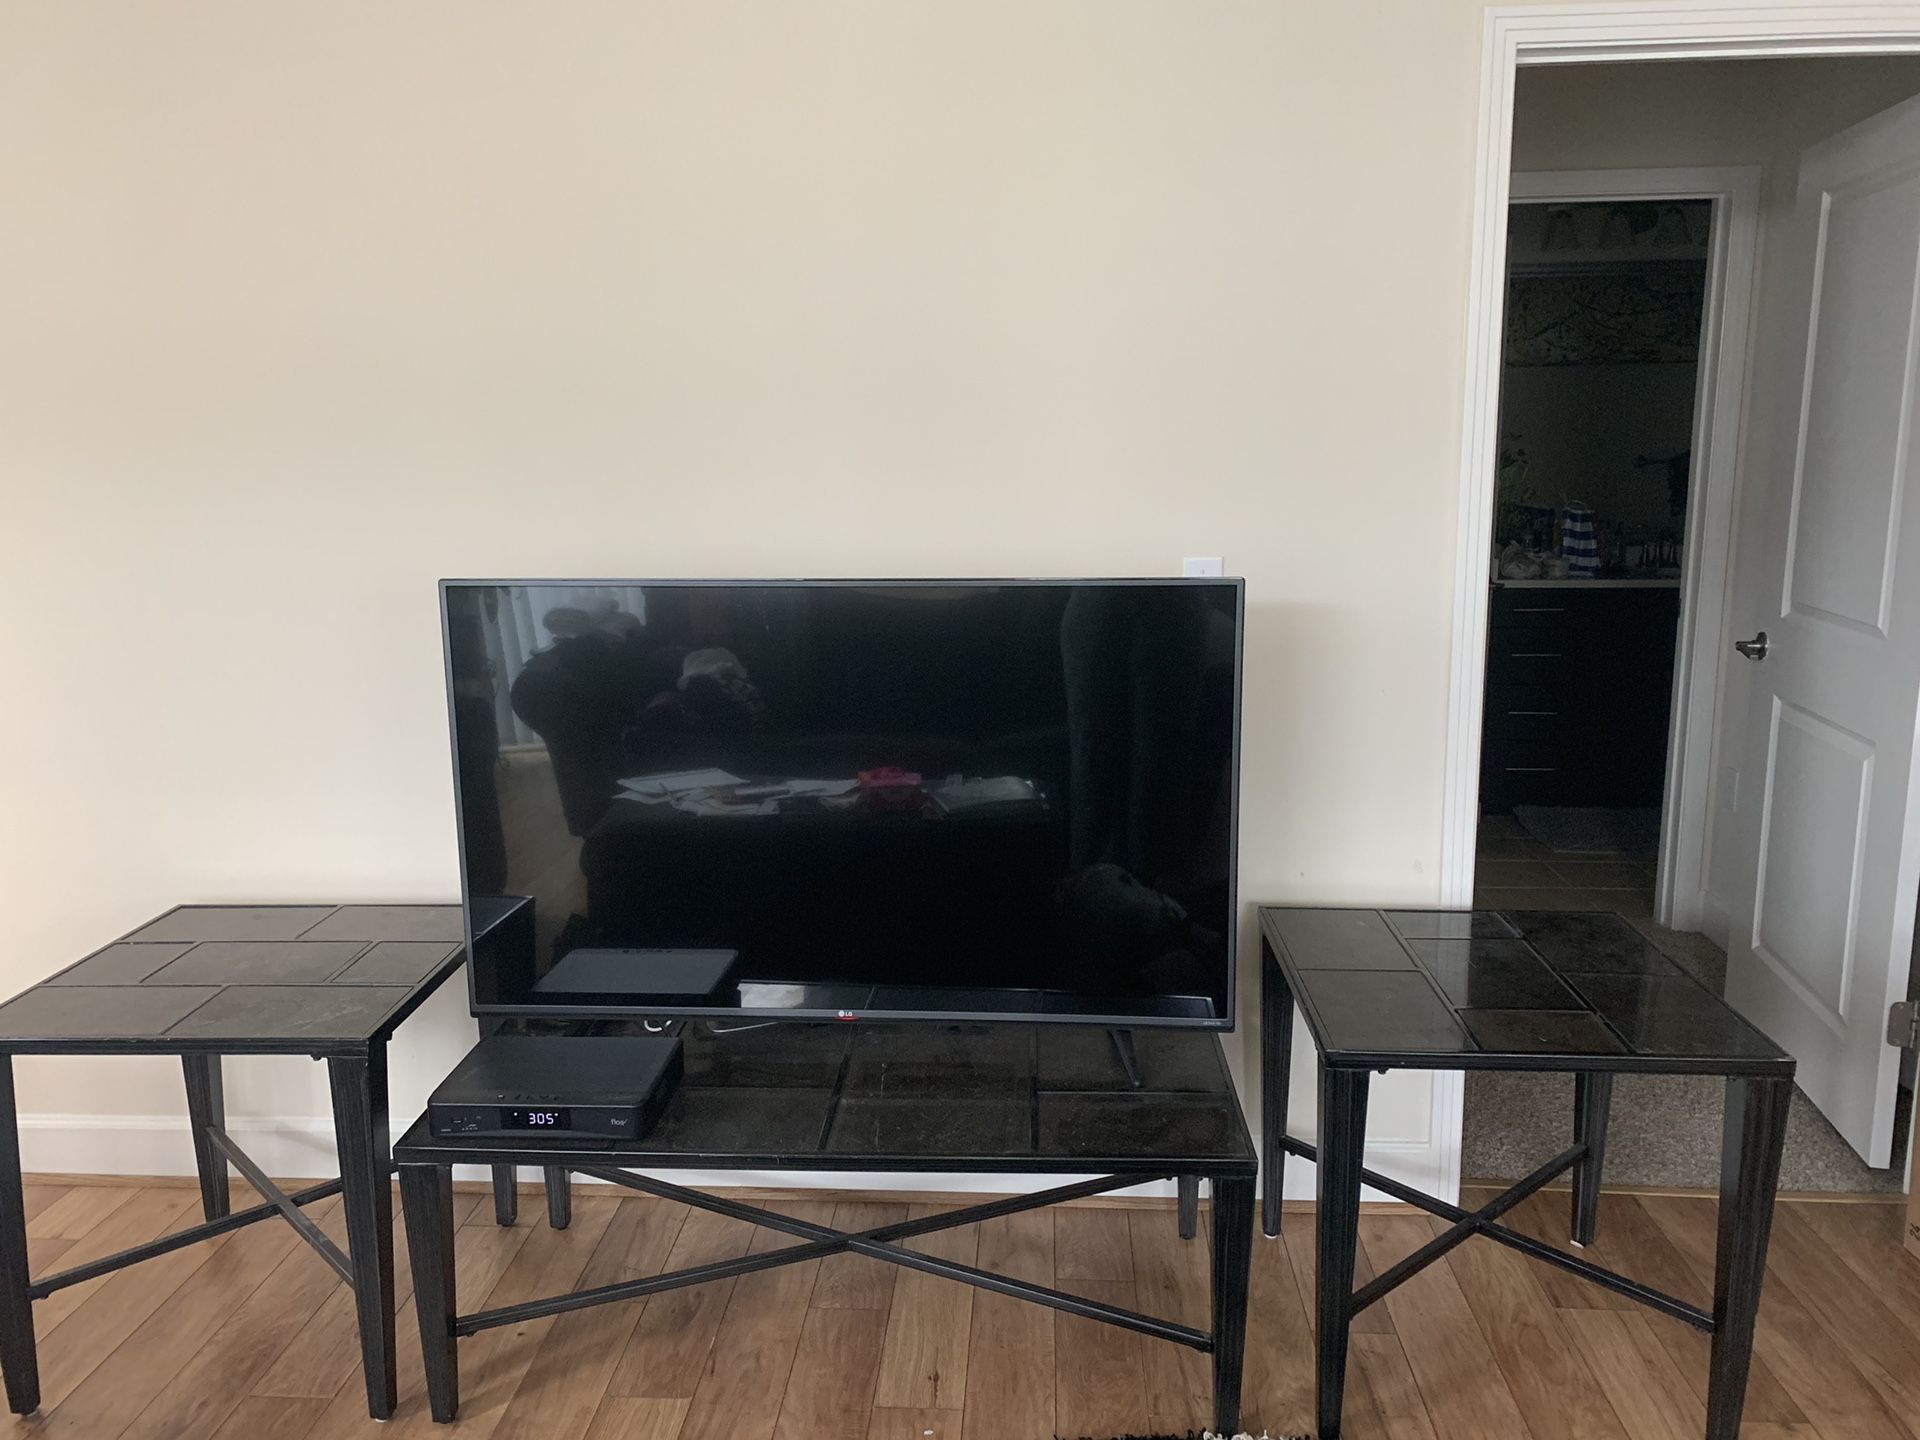 Coffee table with 2 end tables